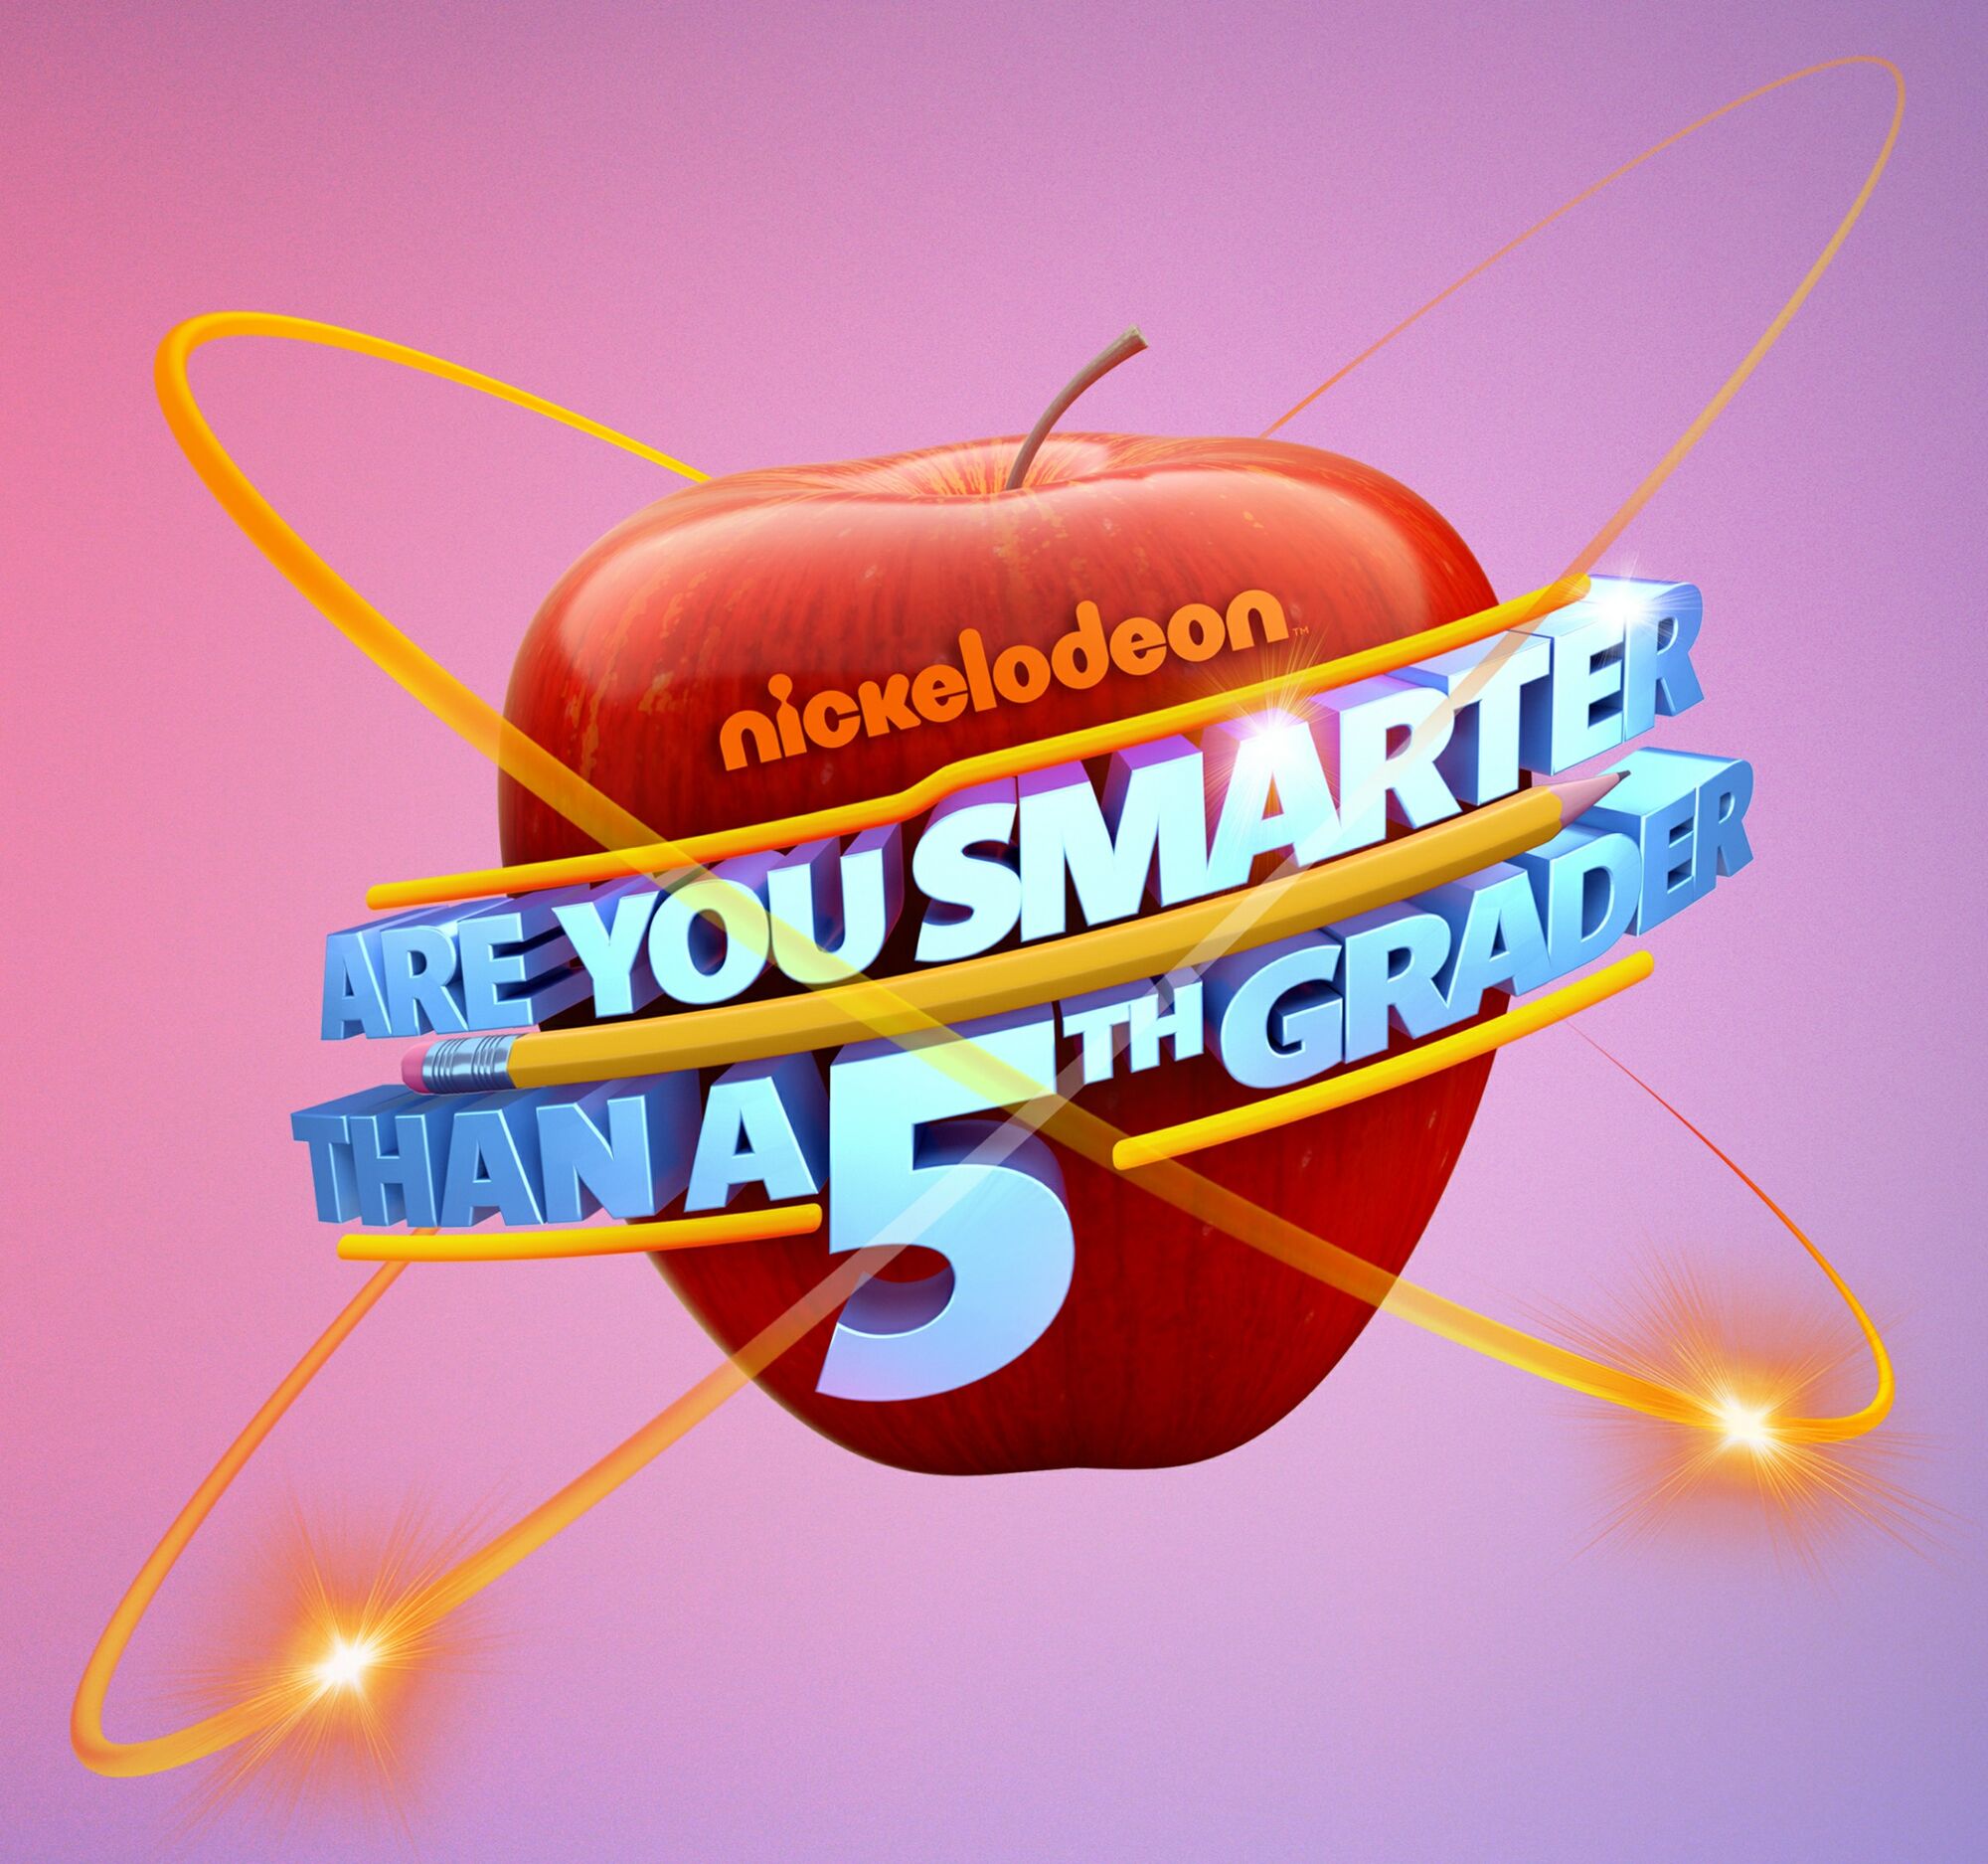 Are You Smarter than a 5th Grader? Nickelodeon Fandom